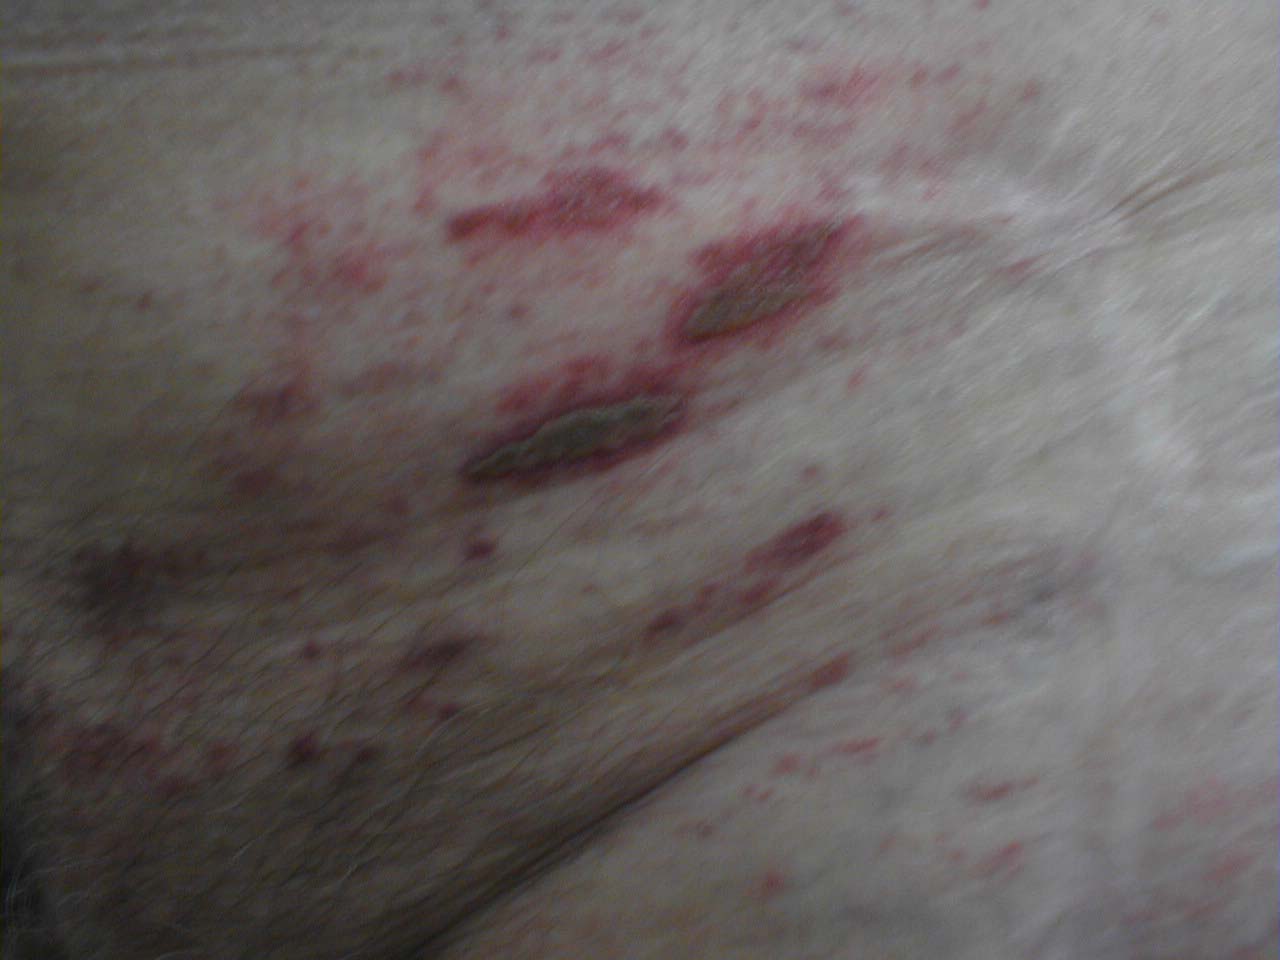 Herpes Zoster: Coalesced vesicles resulting from reactivation of HZV infection.